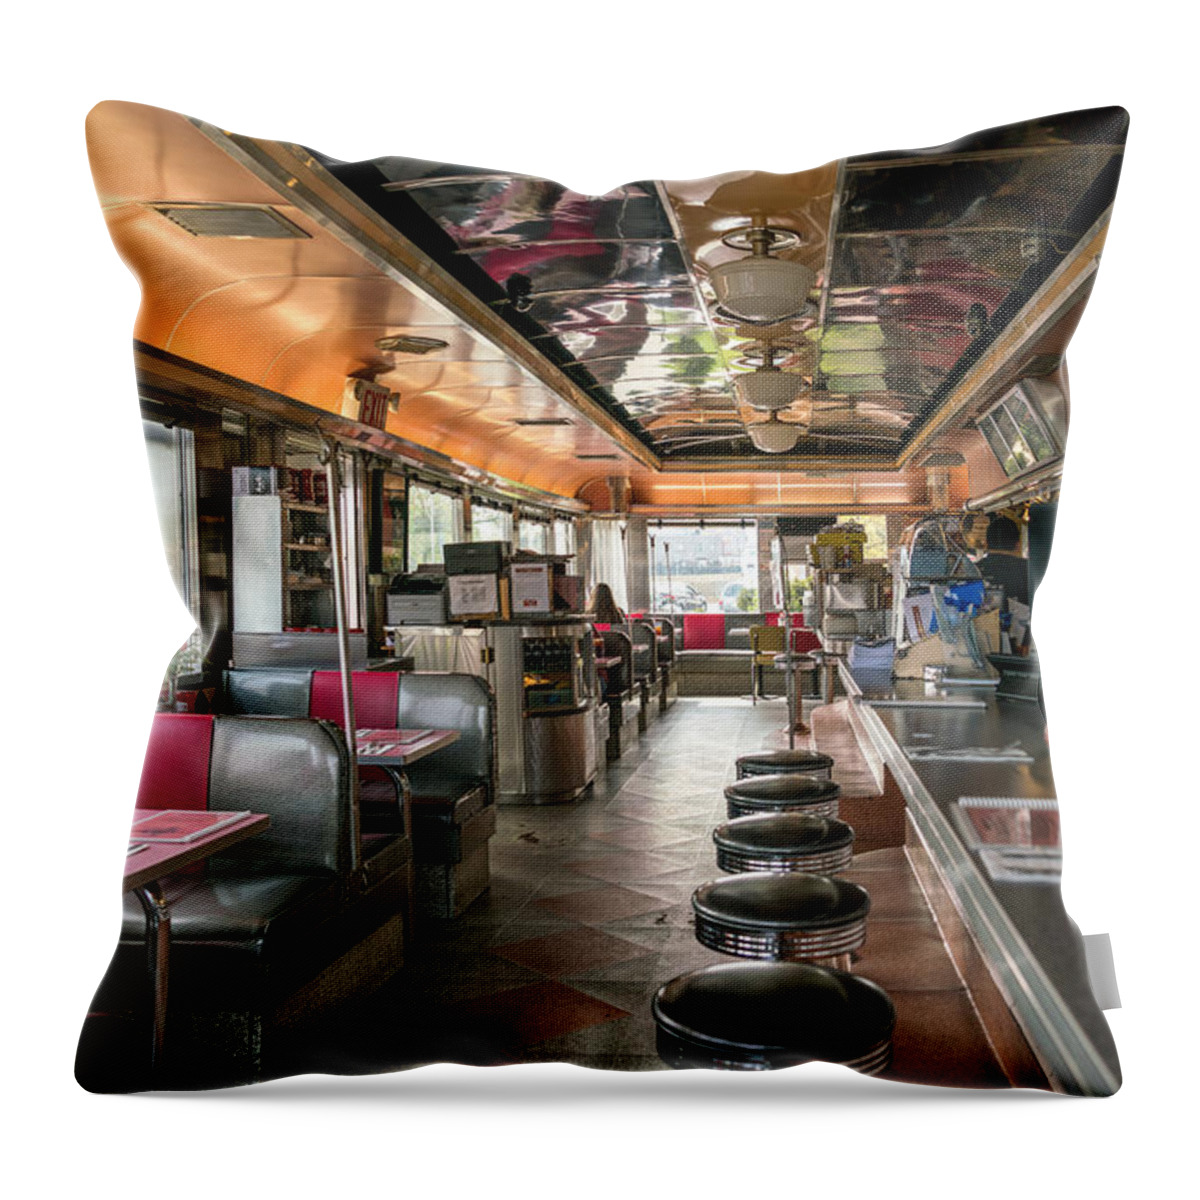 Diner Throw Pillow featuring the photograph Airline Diner by Alexis Fleisig